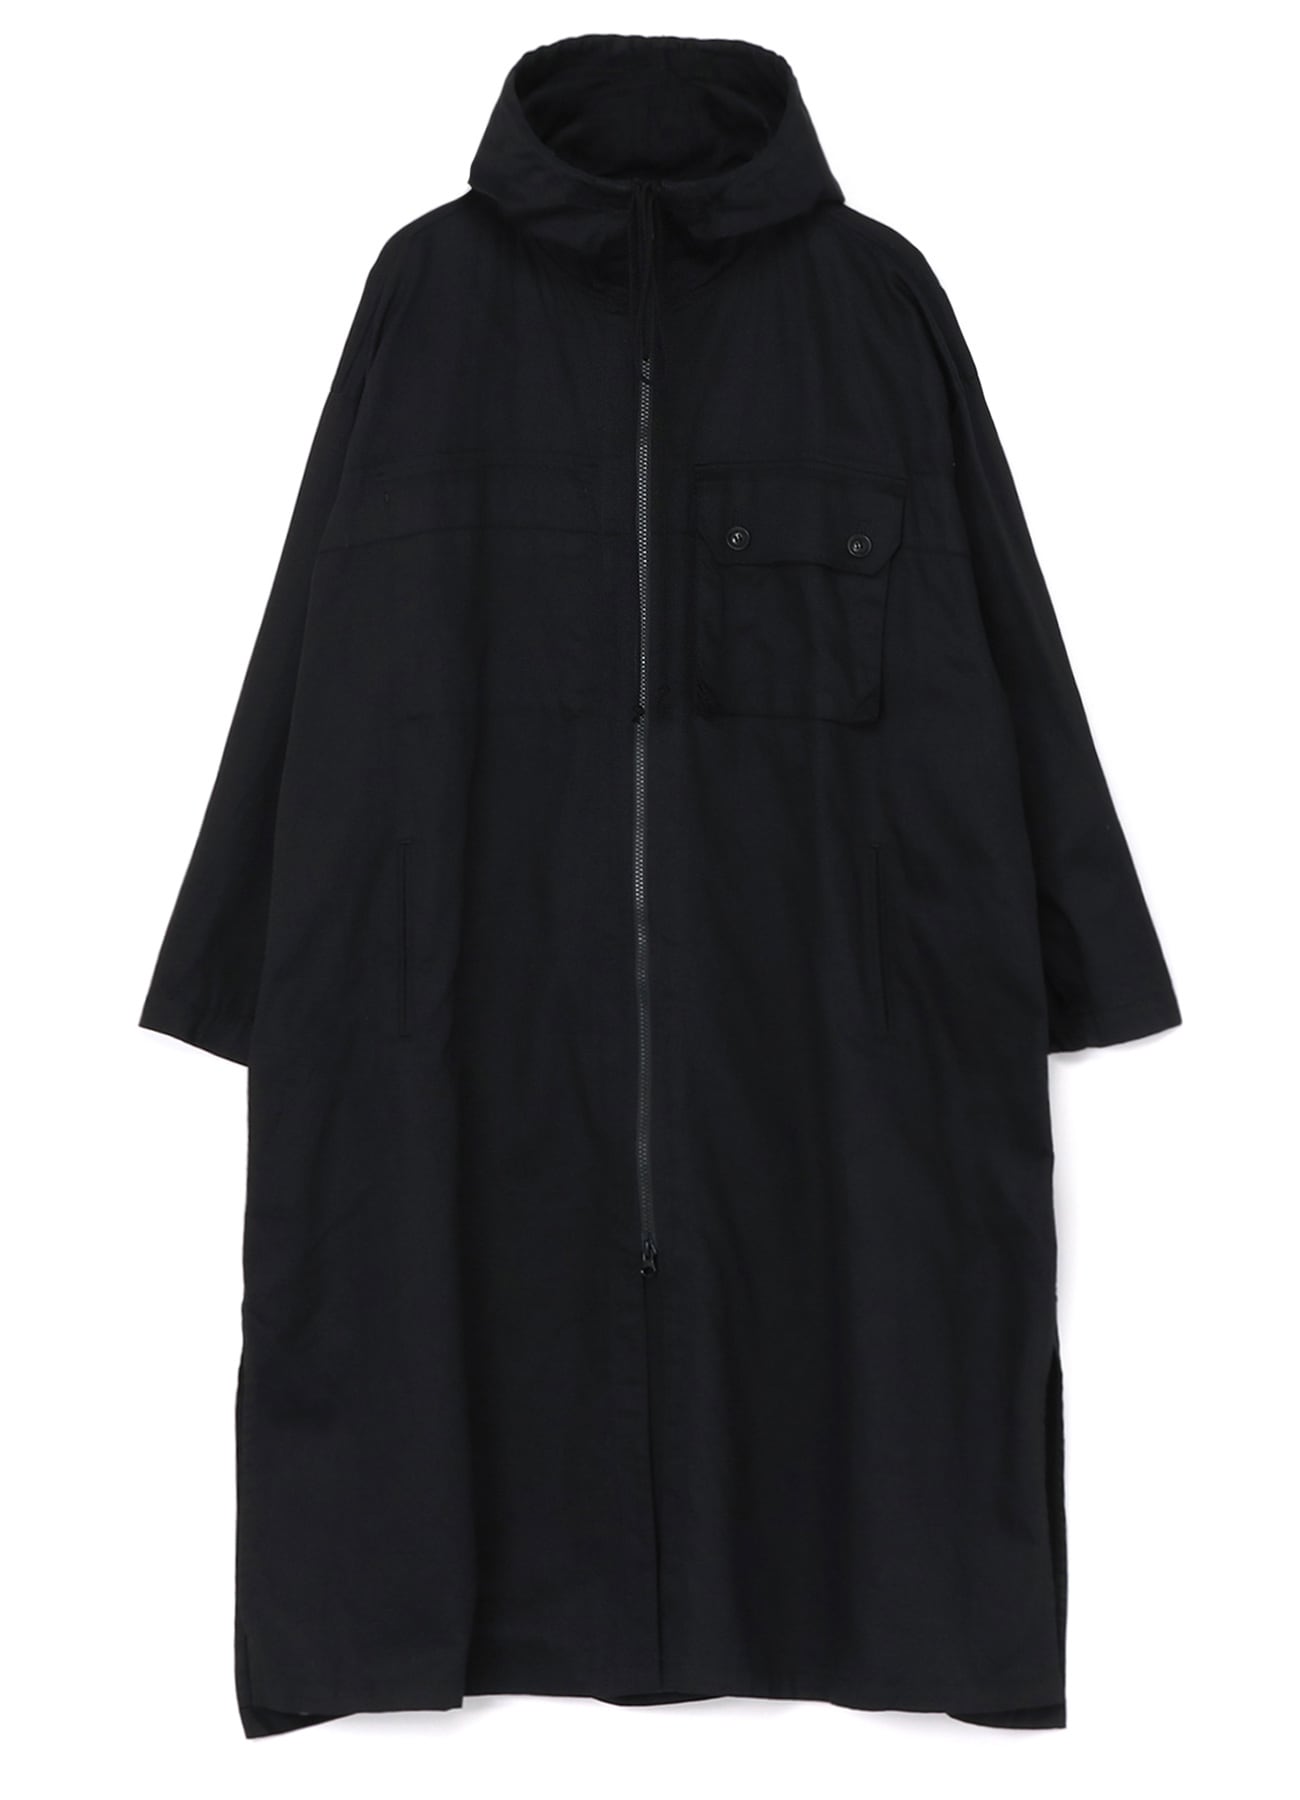 Y's BORN PRODUCT] COTTON TWILL HOODED COAT(XS Black): Y's｜THE 